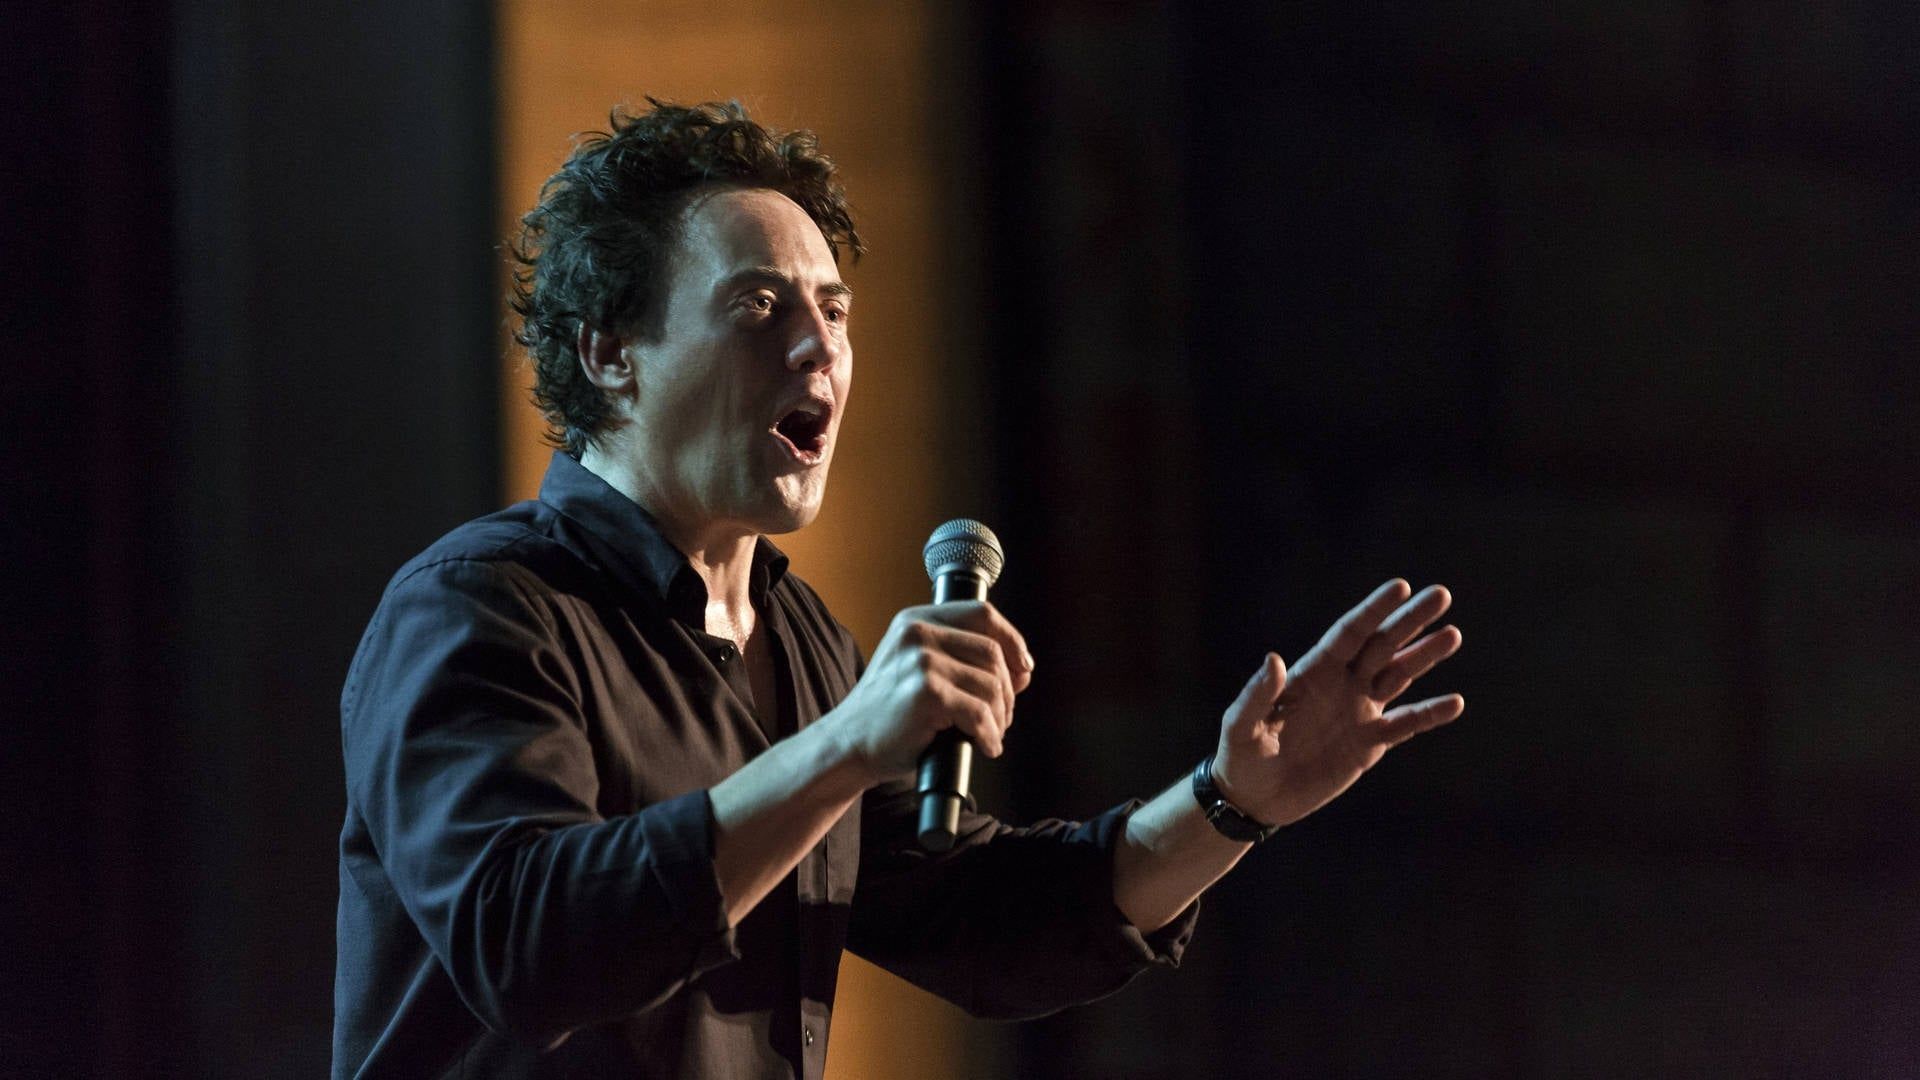 Orny Adams: More than Loud background